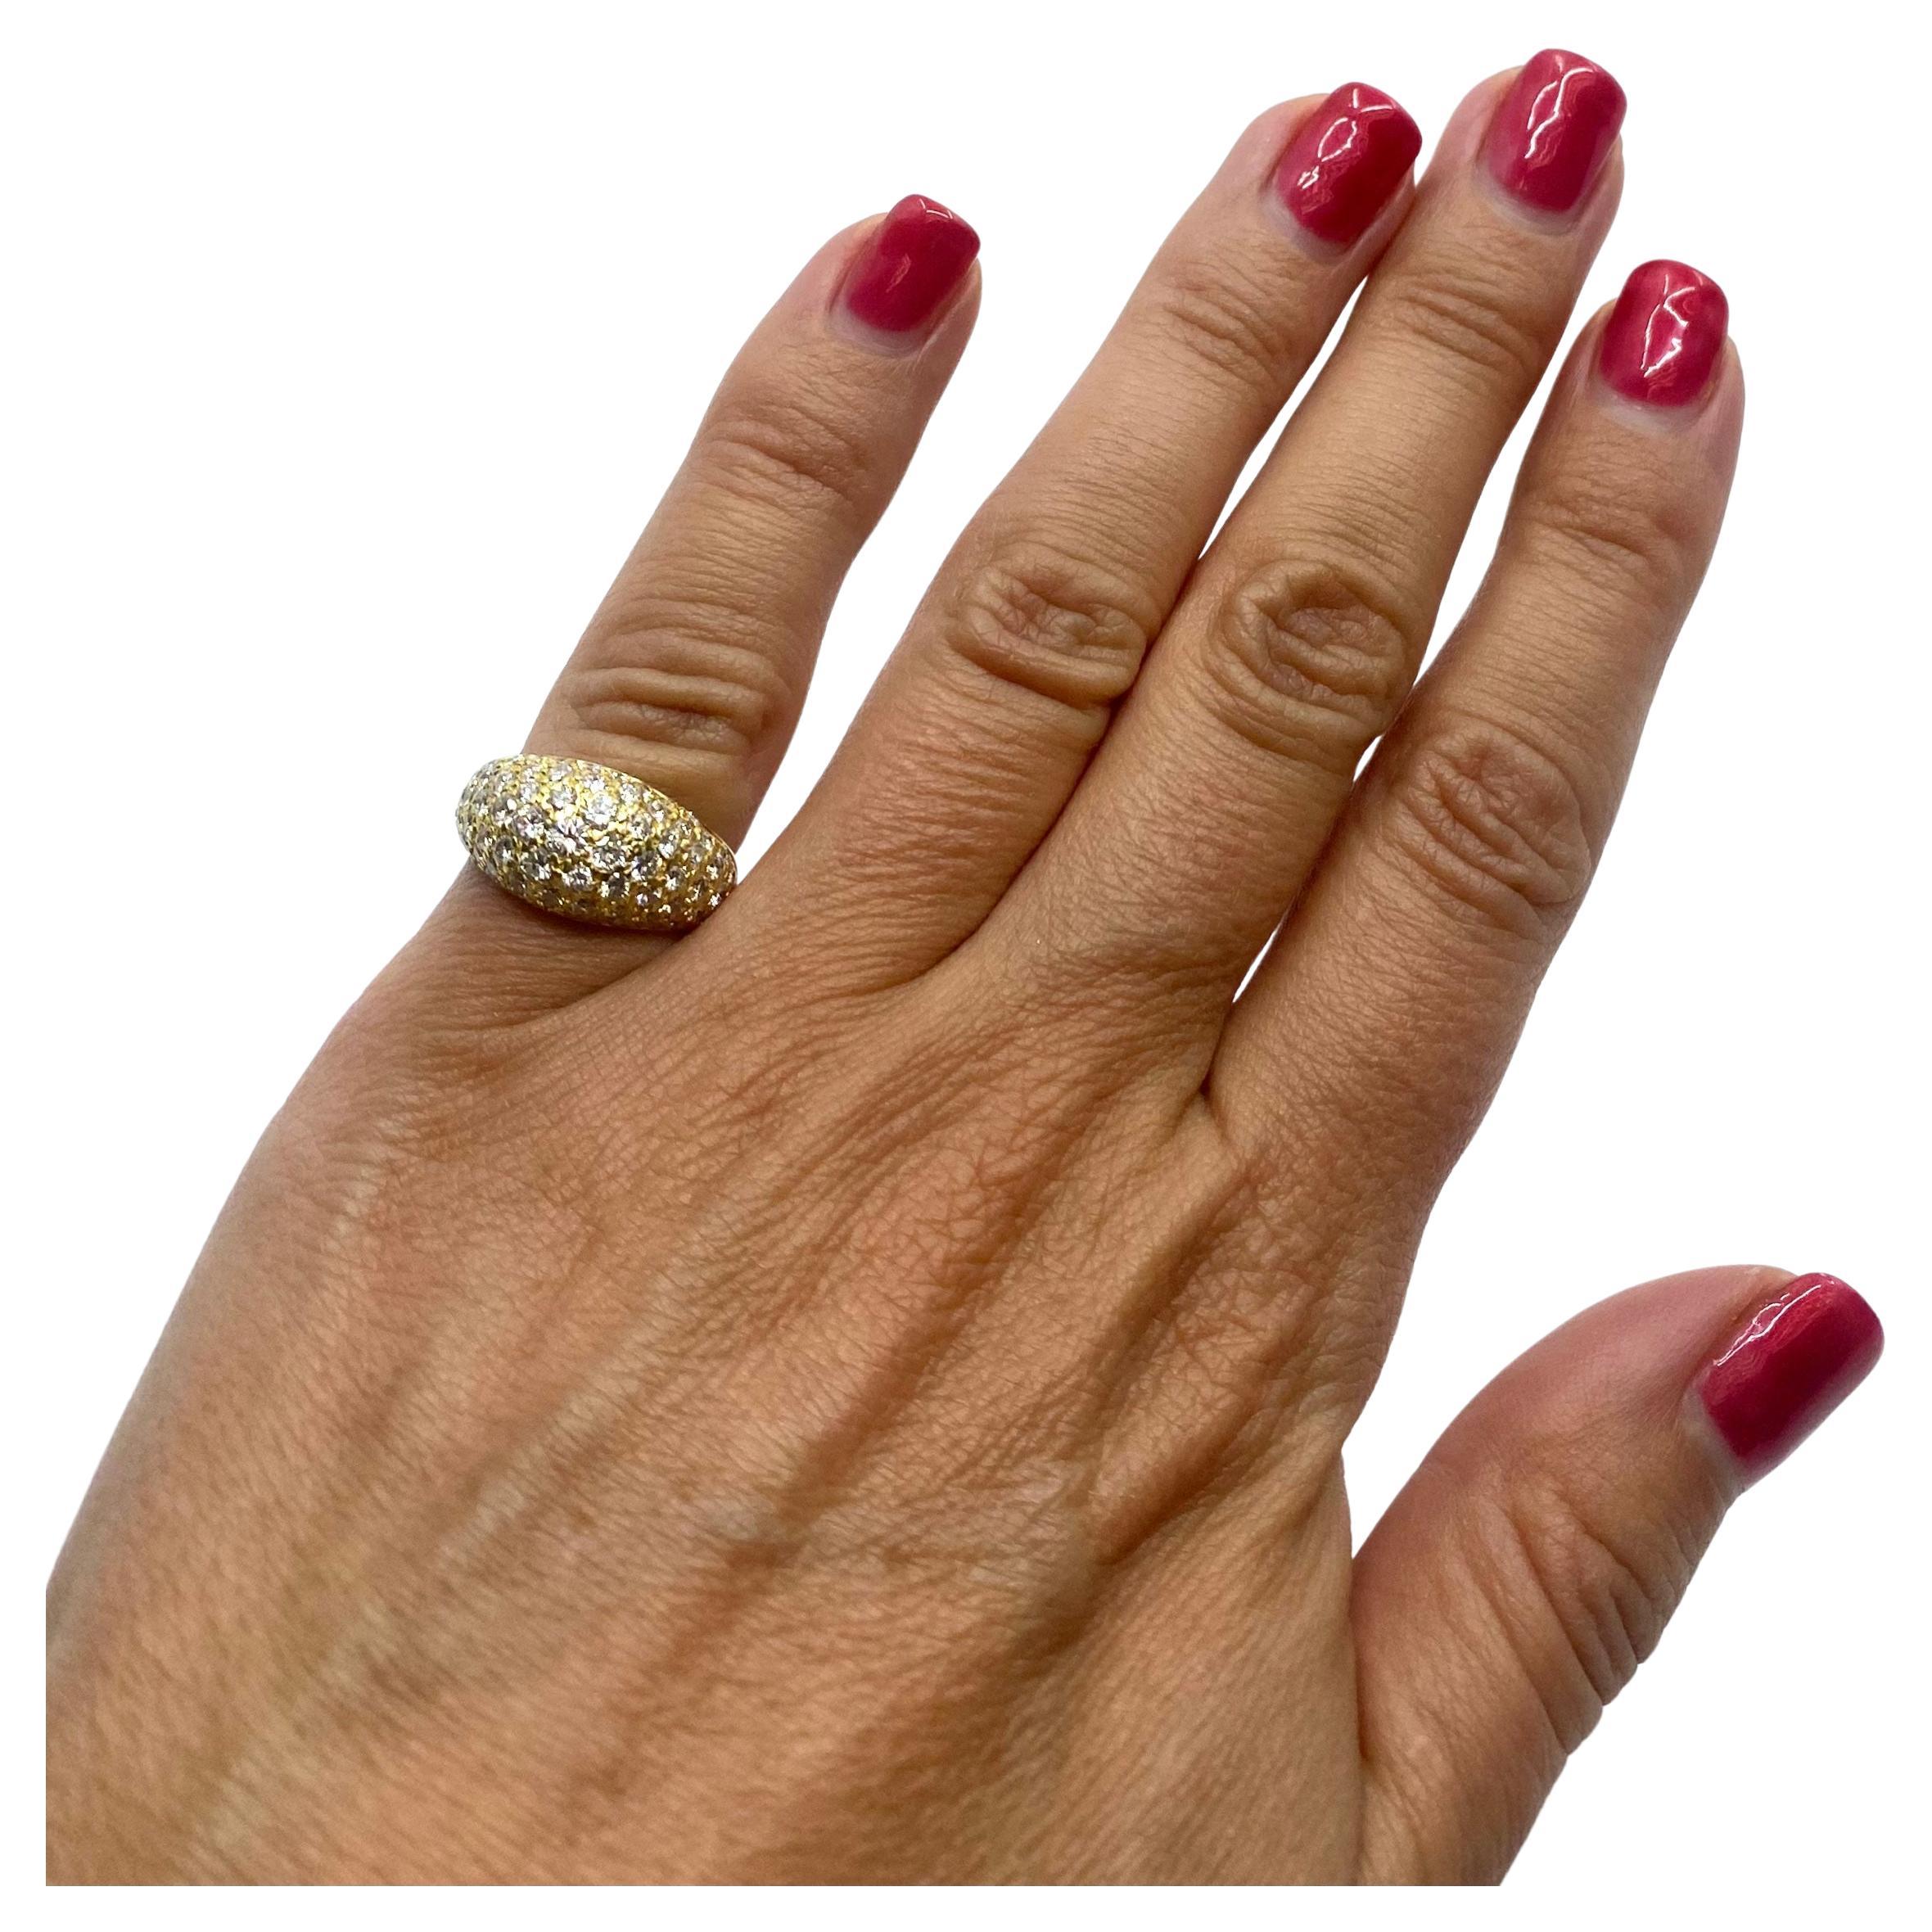 

DESIGNER: Van Cleef & Arpels
MATERIALS: 18k Yellow Gold
GEMSTONE:  Round Brilliant Cut Diamond 
WEIGHT: 4.7 grams
RING SIZE: 5.75
HALLMARKS: VCA, 18K,  & the serial number 

A classic diamond dome ring by Van Cleef & Arpels, made of 18k gold. The